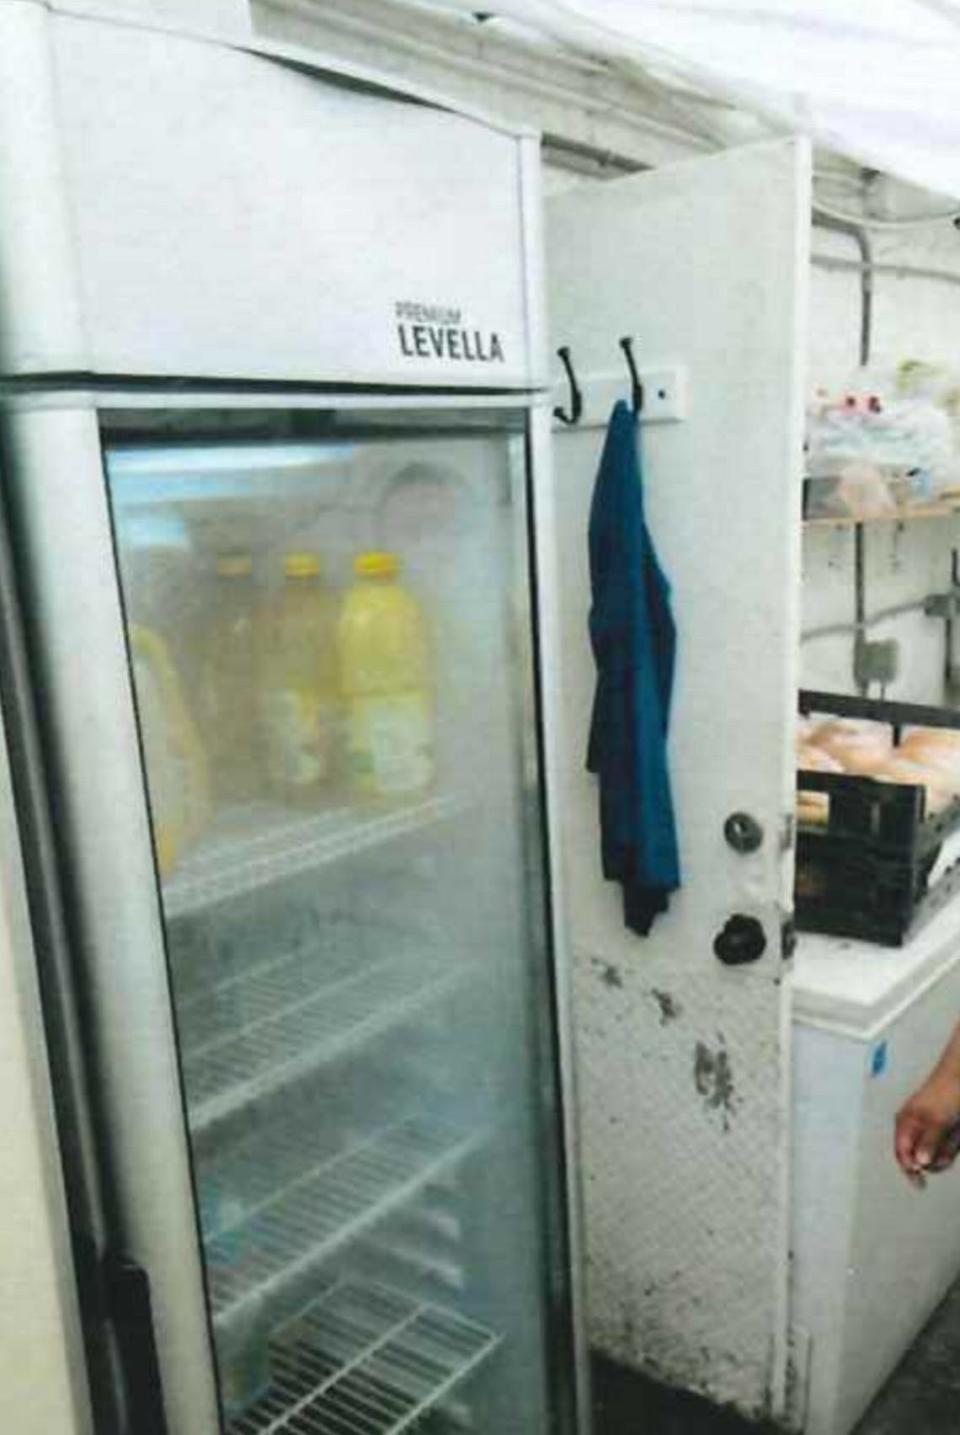 Miami-Dade County prosecutors say former Miami-Dade School Board member Lubby Navarro bought this refrigerator for an ex-boyfriend’s Fort Lauderdale restaurant.